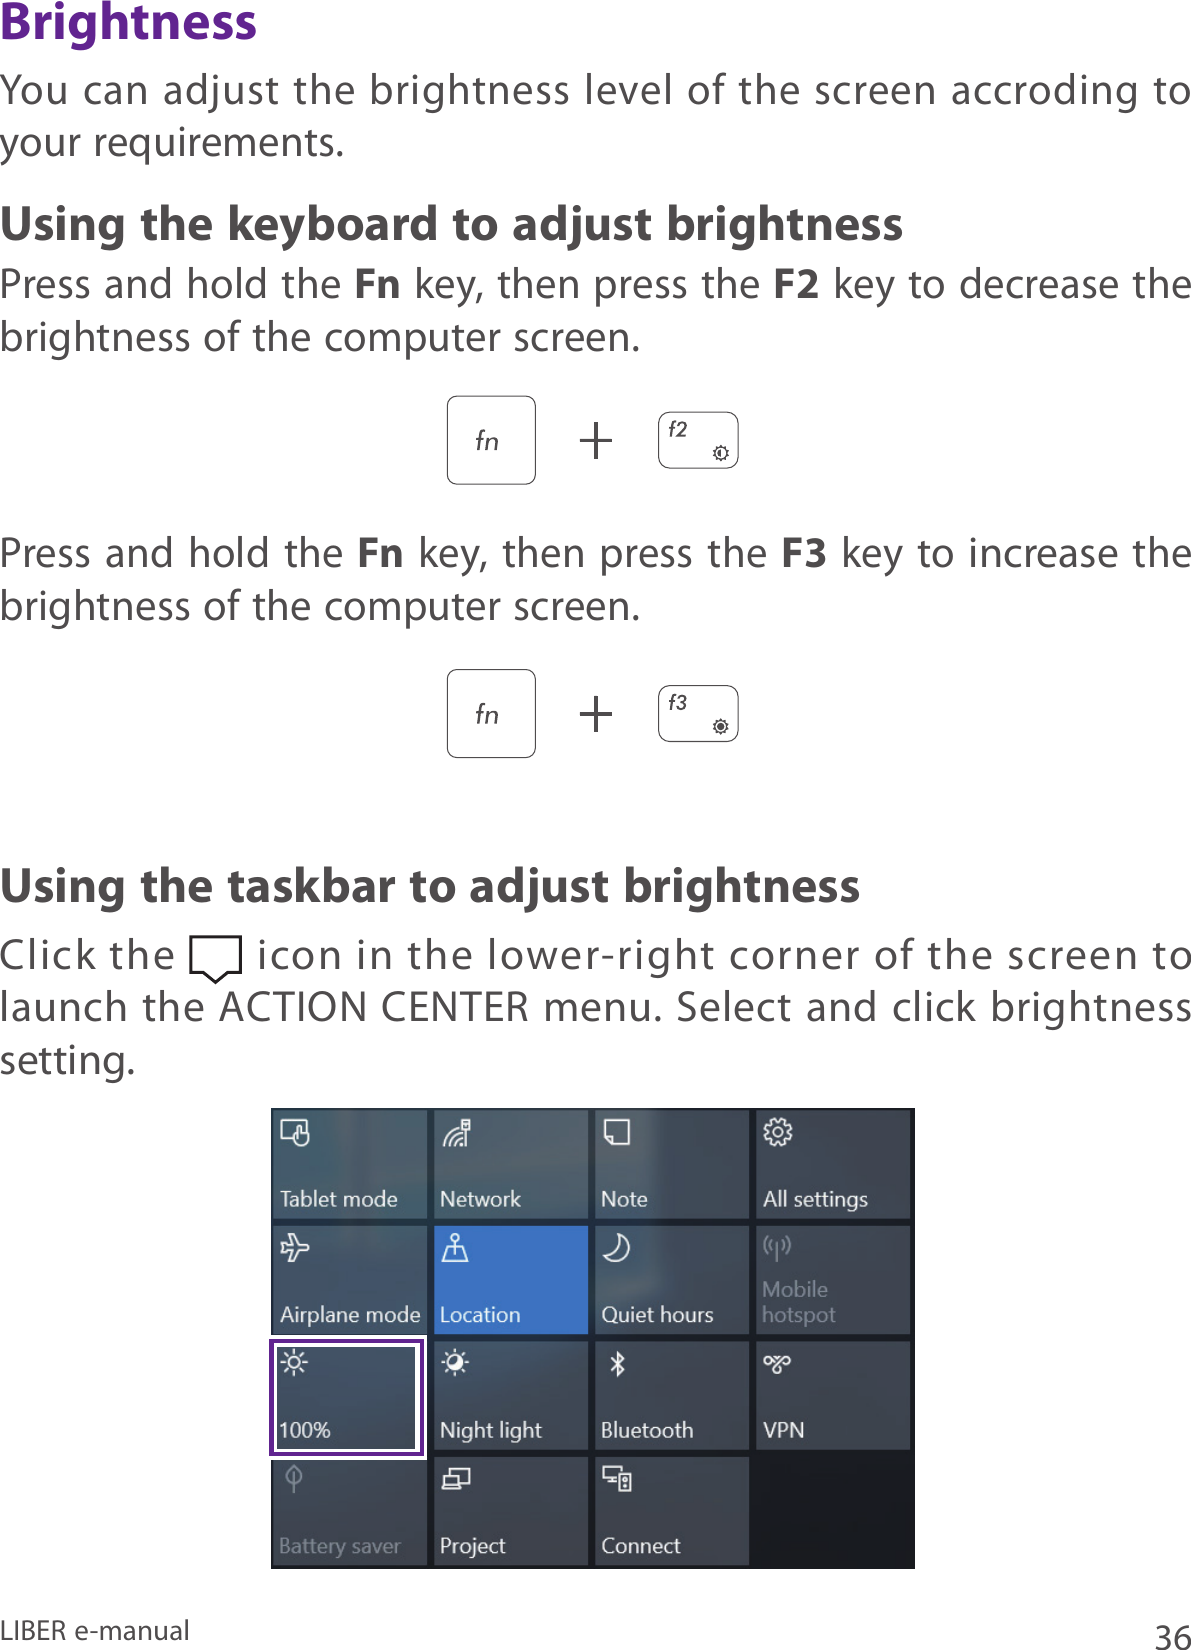 36LIBER e-manualYou  can adjust  the brightness level of  the screen  accroding to your requirements.Press and hold the Fn key, then press the F2 key to decrease the brightness of the computer screen.Press and hold the Fn key, then press the F3 key to increase the brightness of the computer screen.Using the keyboard to adjust brightnessUsing the taskbar to adjust brightnessBrightnessClick the   icon in the lower-right corner of the screen to launch the ACTION CENTER menu. Select and click brightness setting.